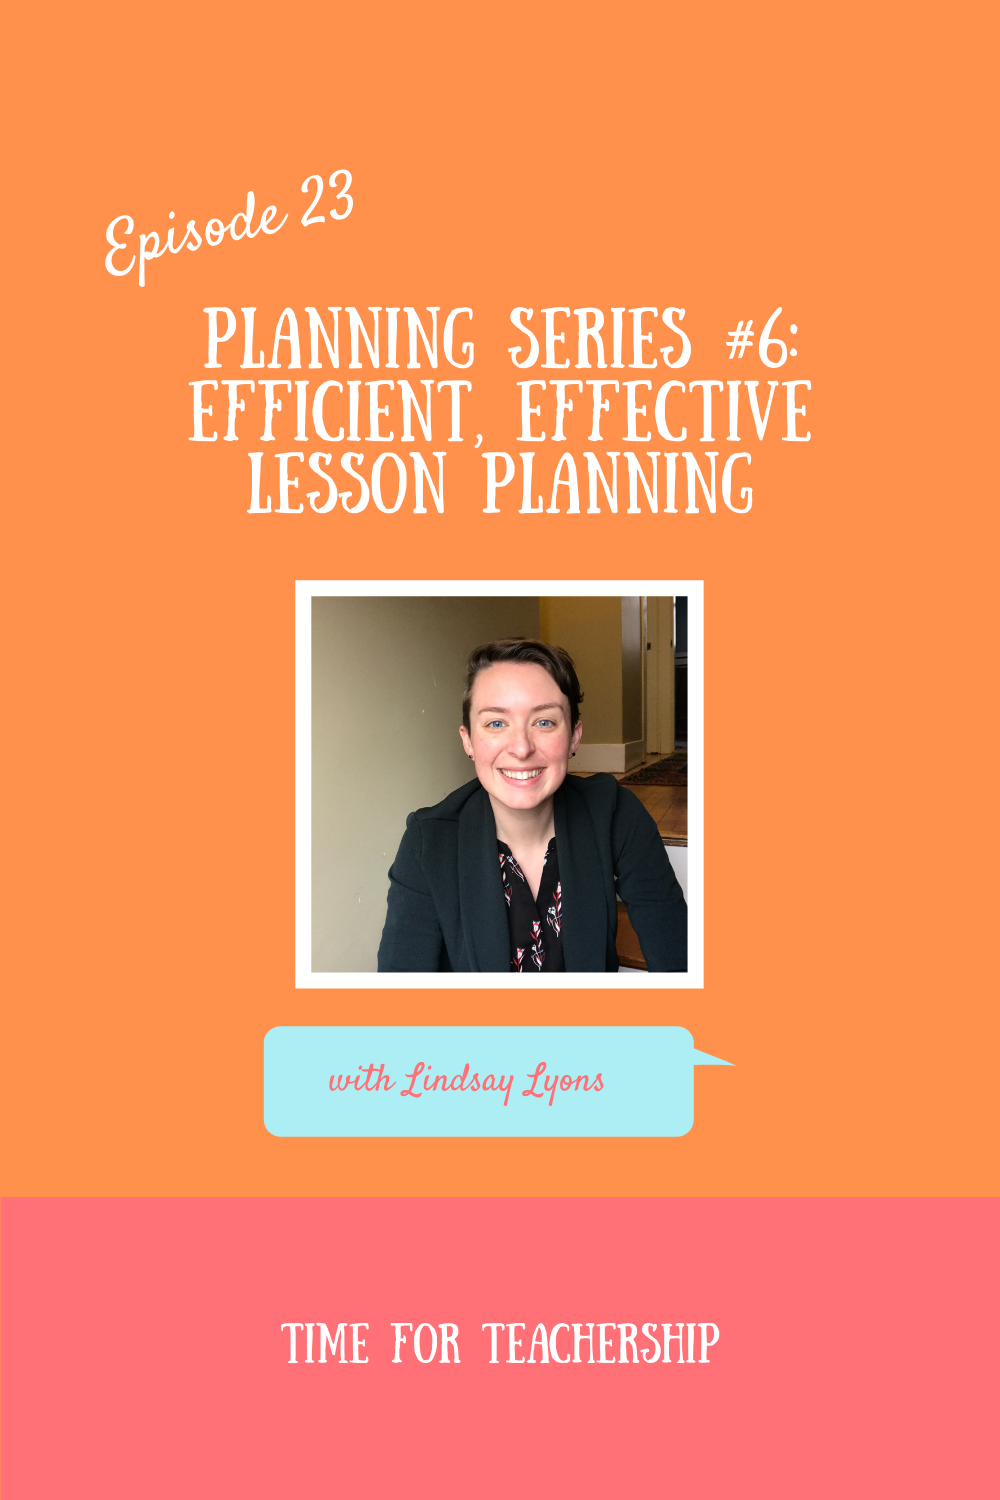 23. Planning Series Part 6-Efficient, Effective Lesson Planning. This is the last installment of the Planning Series! In this episode, you'll receive five more strategies for creating efficient lesson plans that save you time and engage more students. Check out the Time for Teachership blog post for lesson planning tips. For more tips and #teacherfreebies, sign up for weekly emails at bit.ly/lindsayletter